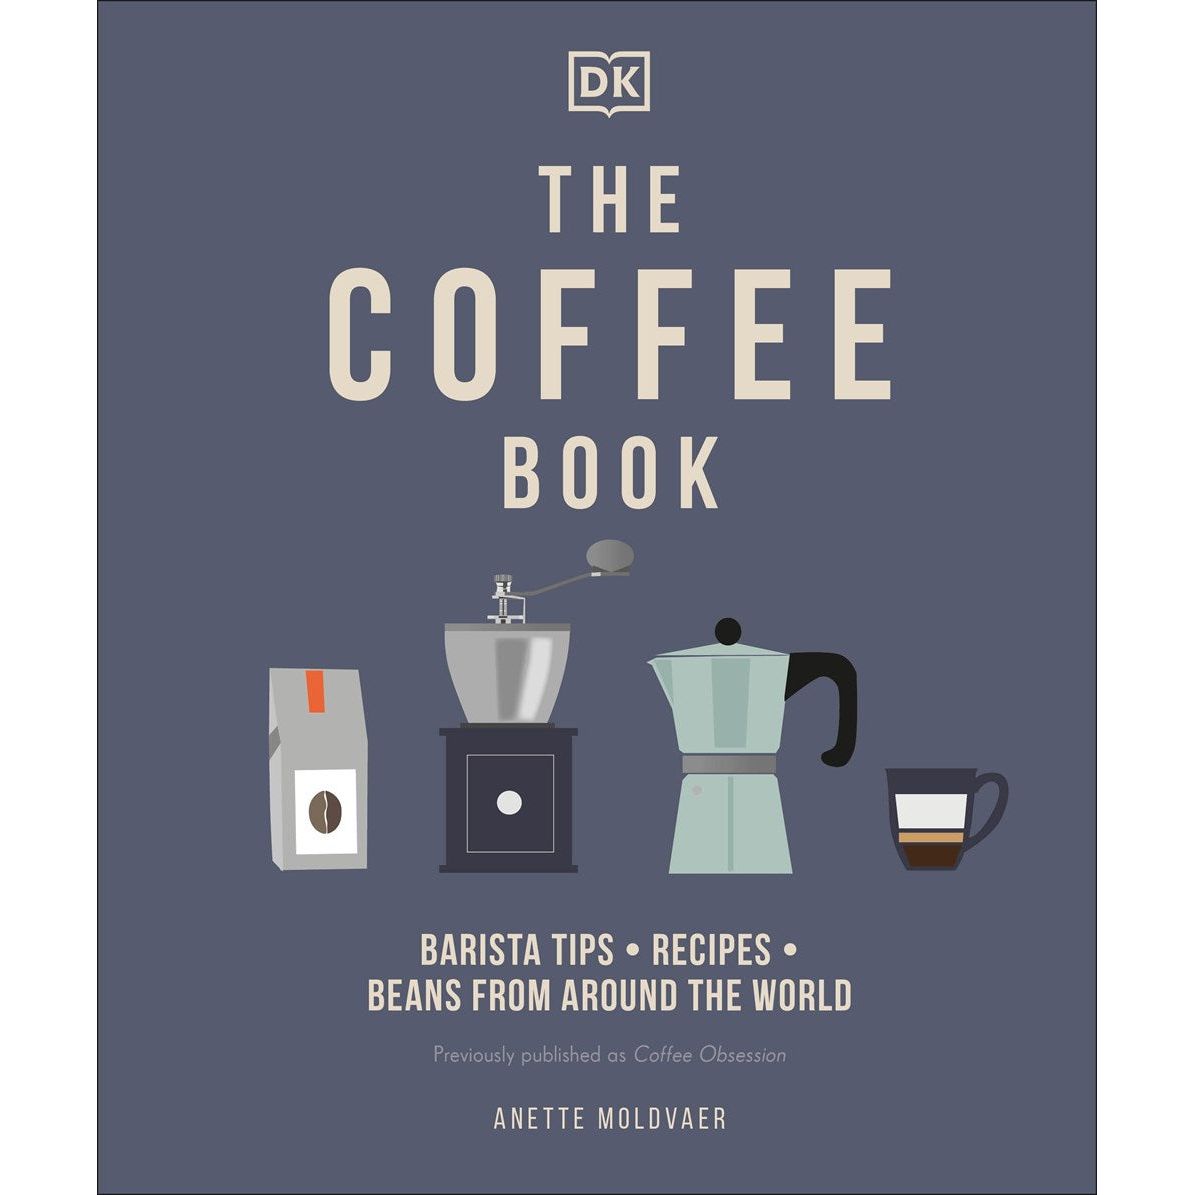 The Coffee Book: Barista Tips * Recipes * Beans from Around